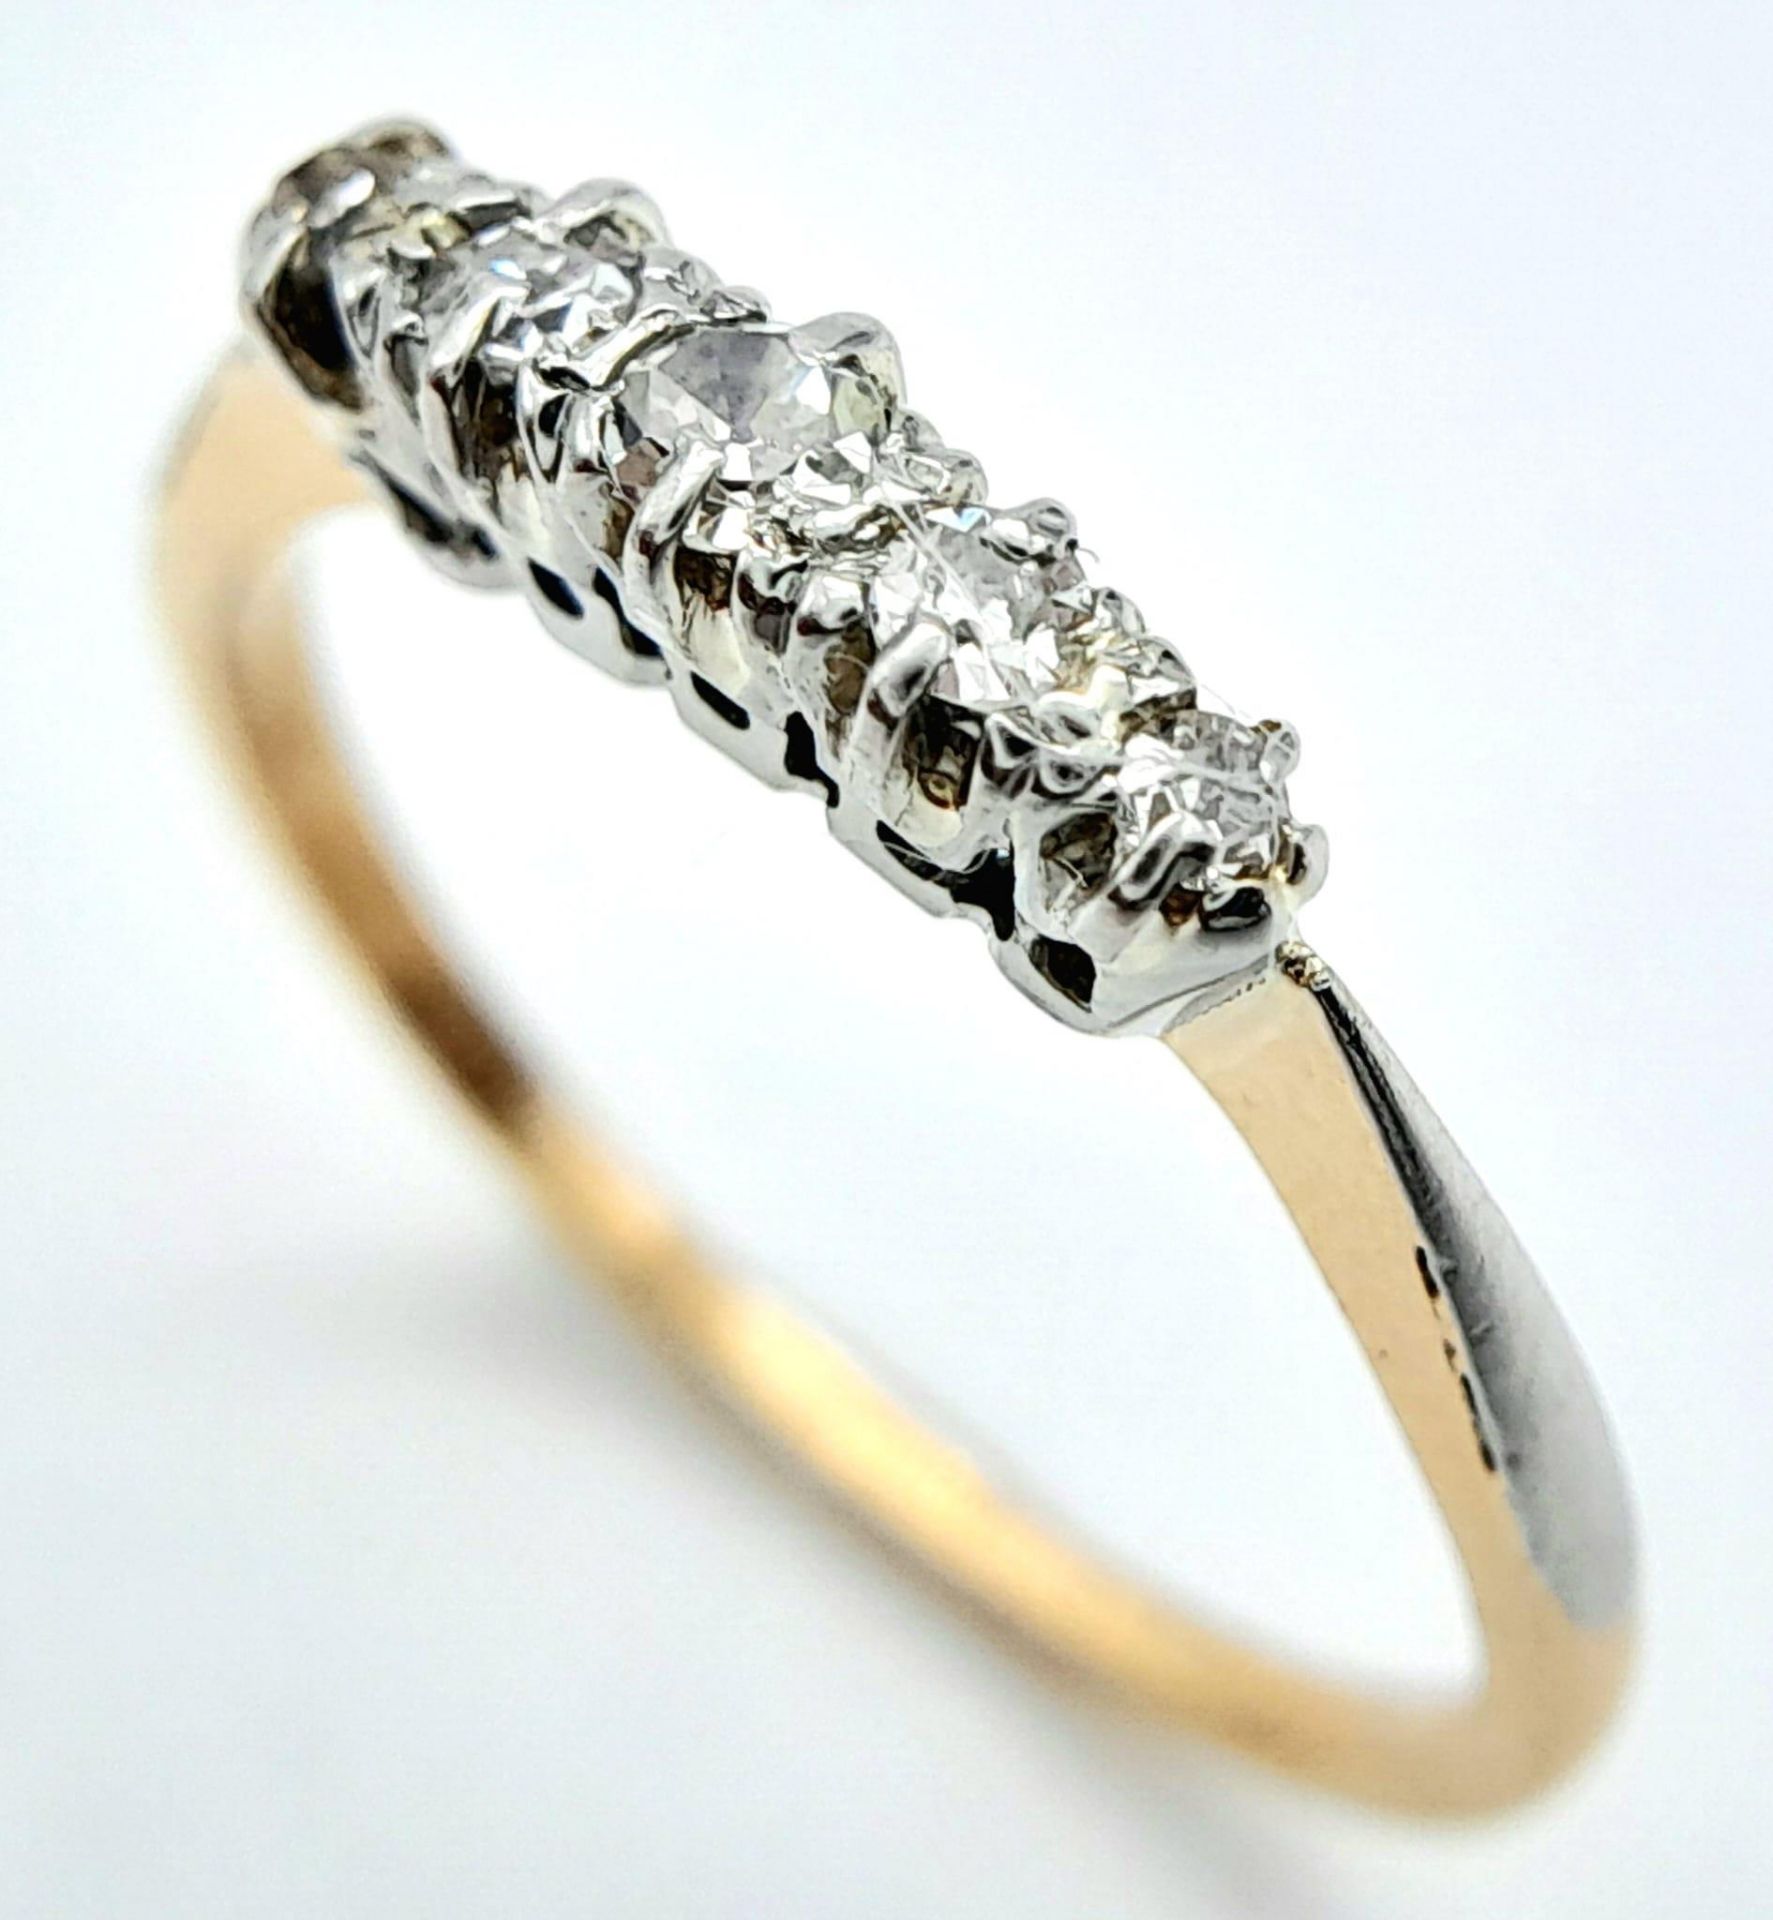 AN 18K YELLOW GOLD VINTAGE OLD CUT DIAMOND 5 STONE RING. 0.20CT. 2.1G SIZE. L 1/2. - Image 2 of 5